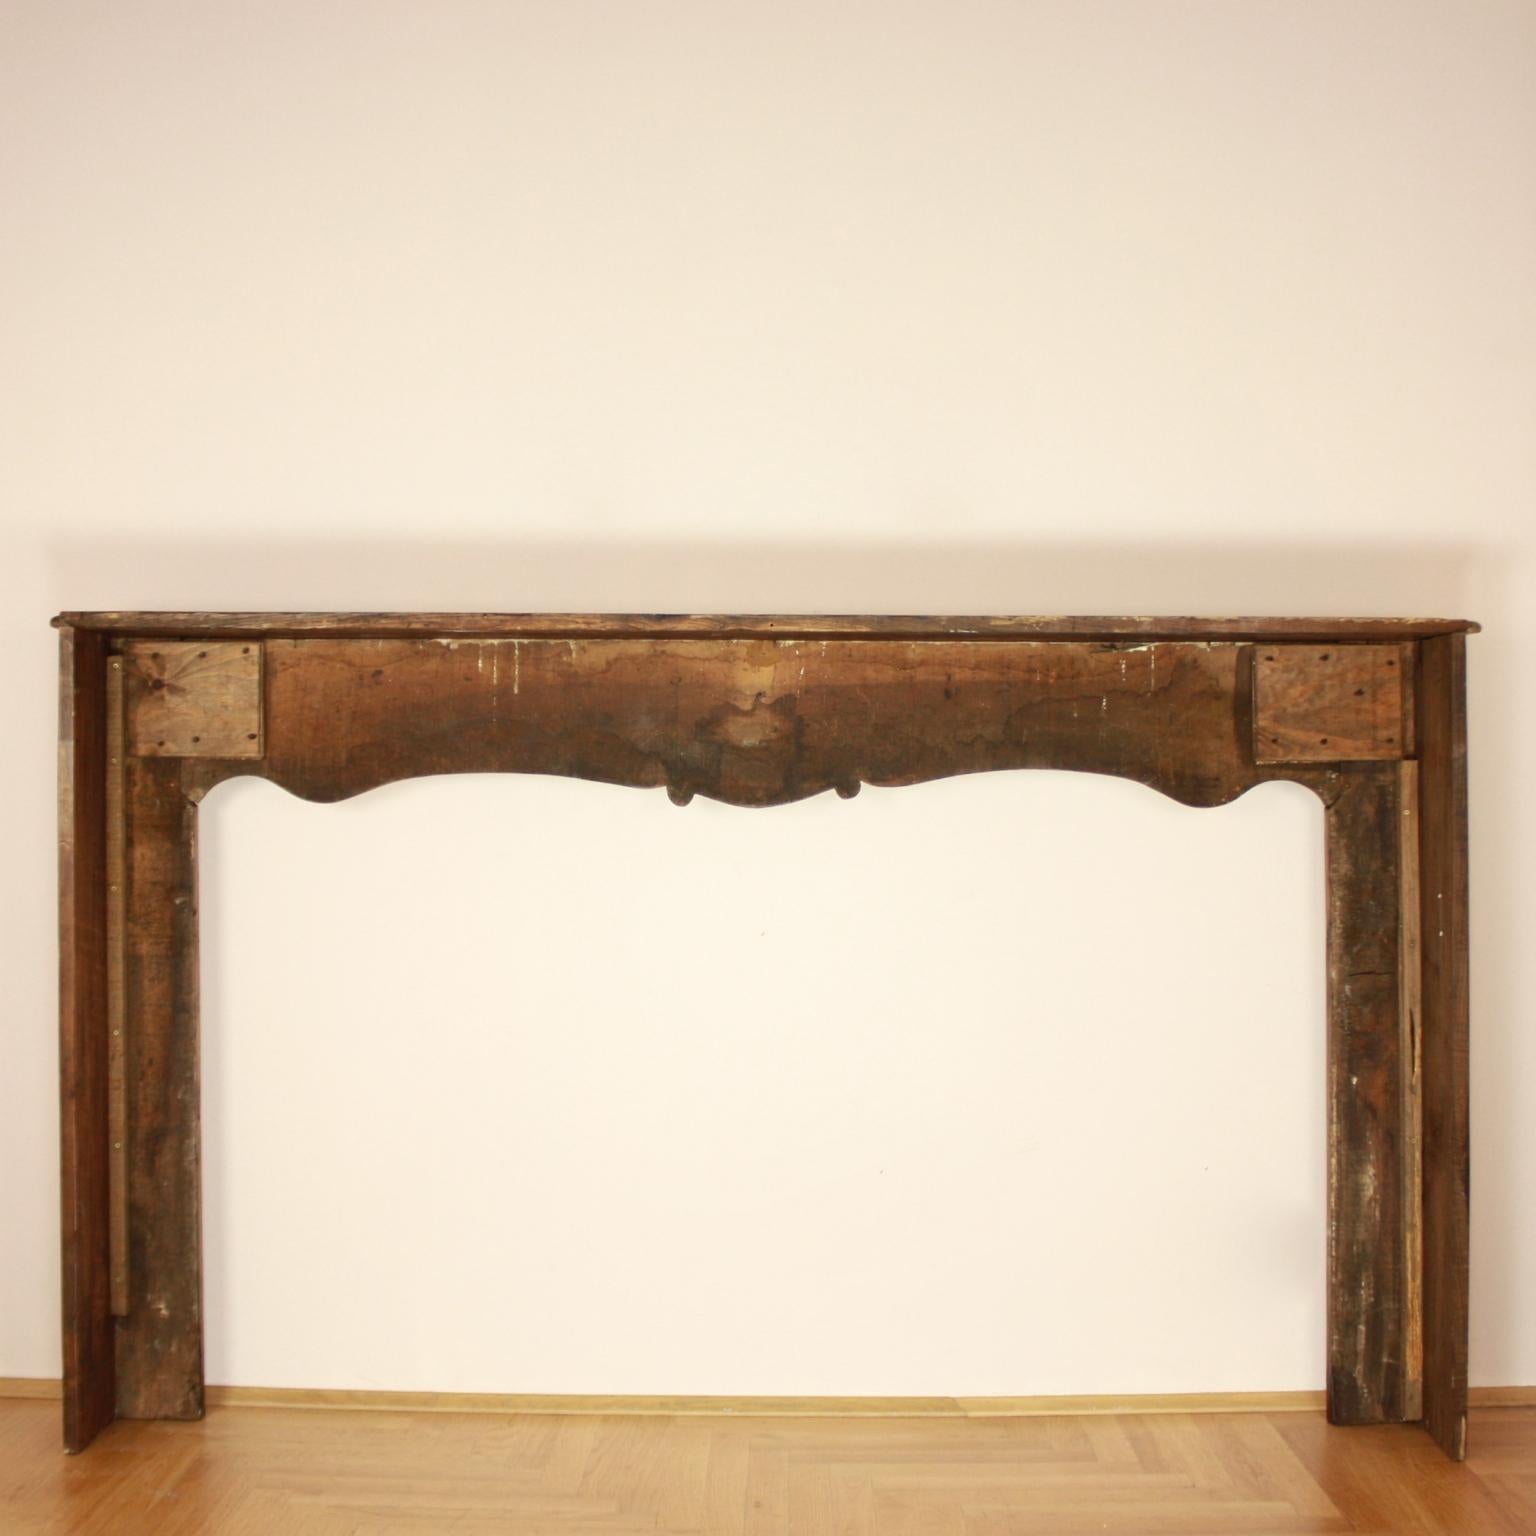 Large Early 18th Century French Provincial Walnut Fire Surround or Chimney Piece For Sale 5